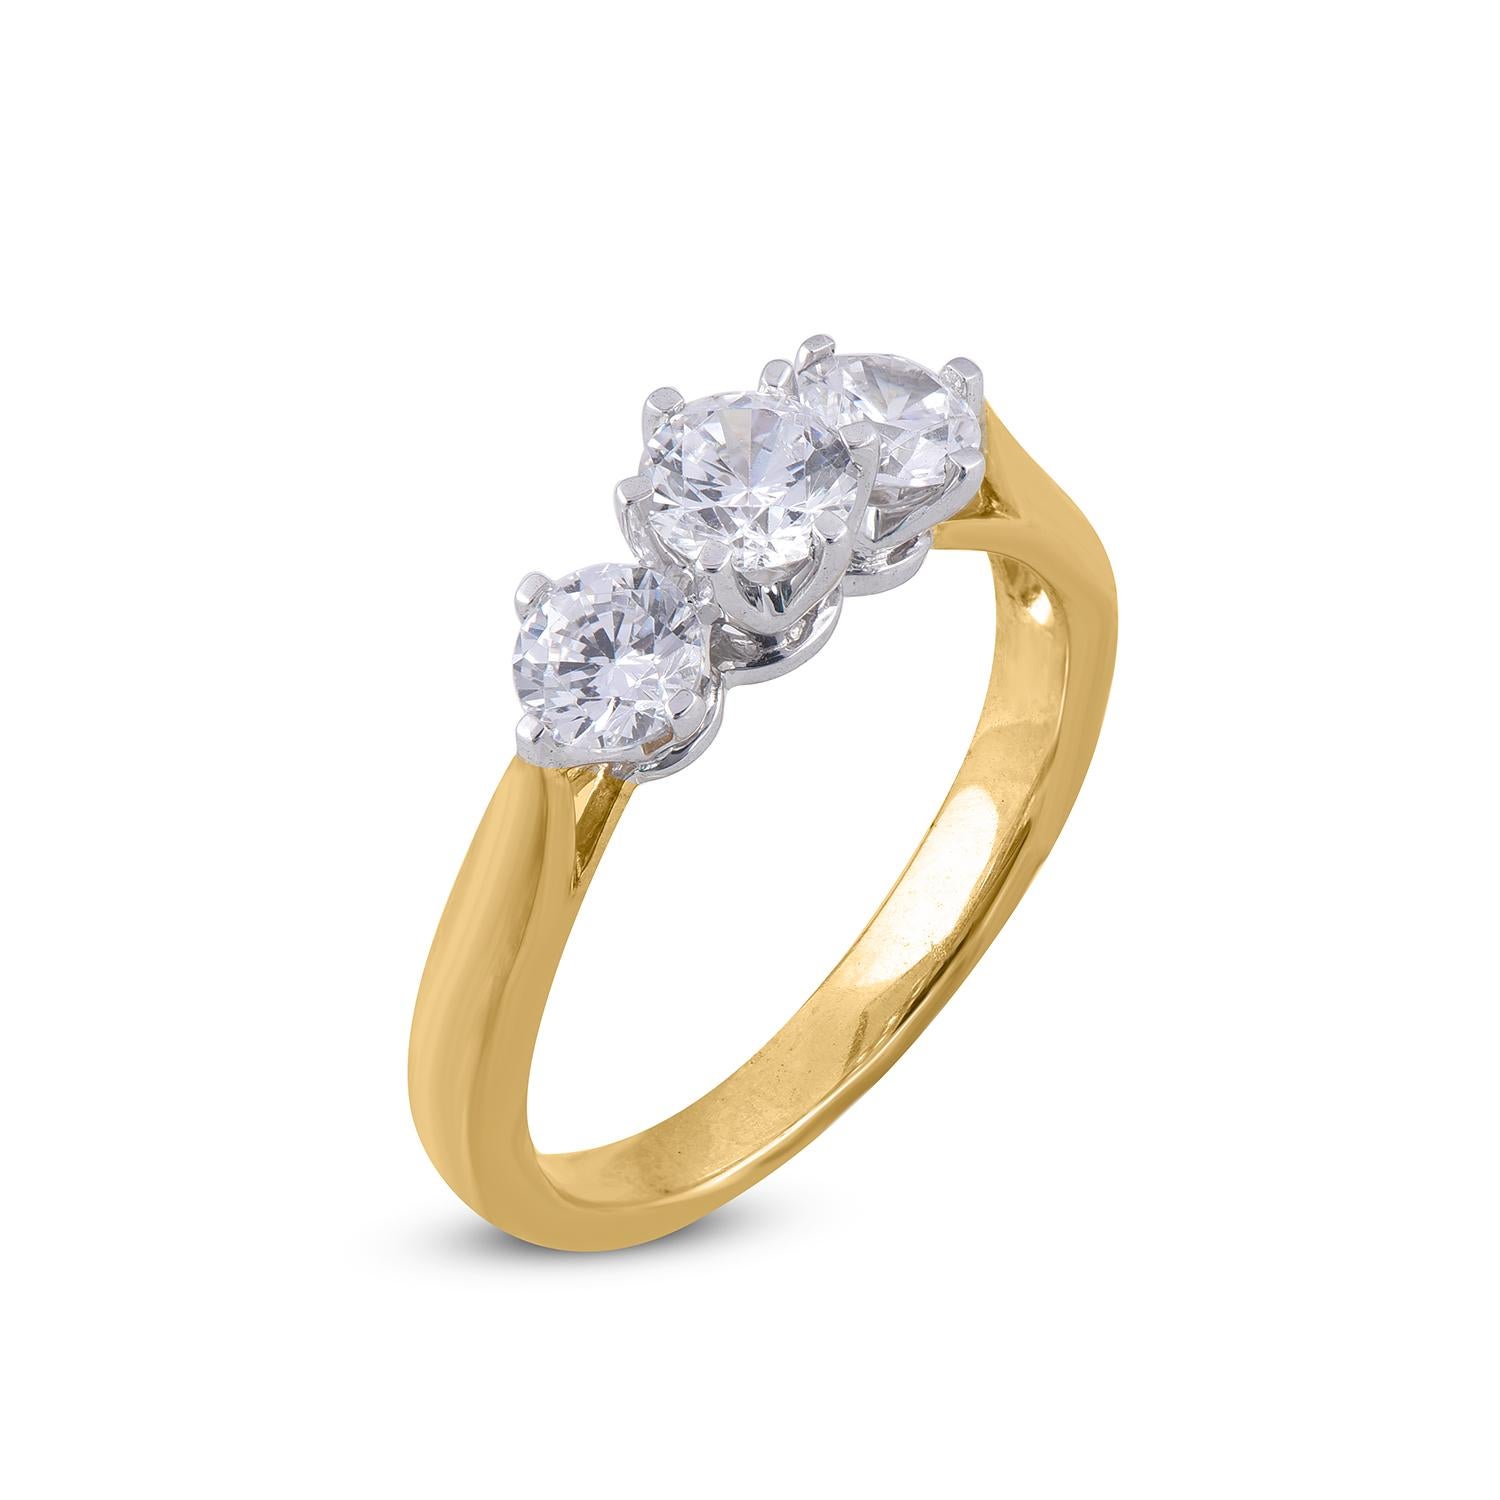 This elegant diamond ring shines bright with 3 brilliant cut diamonds set in prong setting and handcrafted in 18 karat two tone and features 0.40ct centre stone and 0.30ct of each side set in prong setting. The diamonds are graded G-H Color, SI1-2